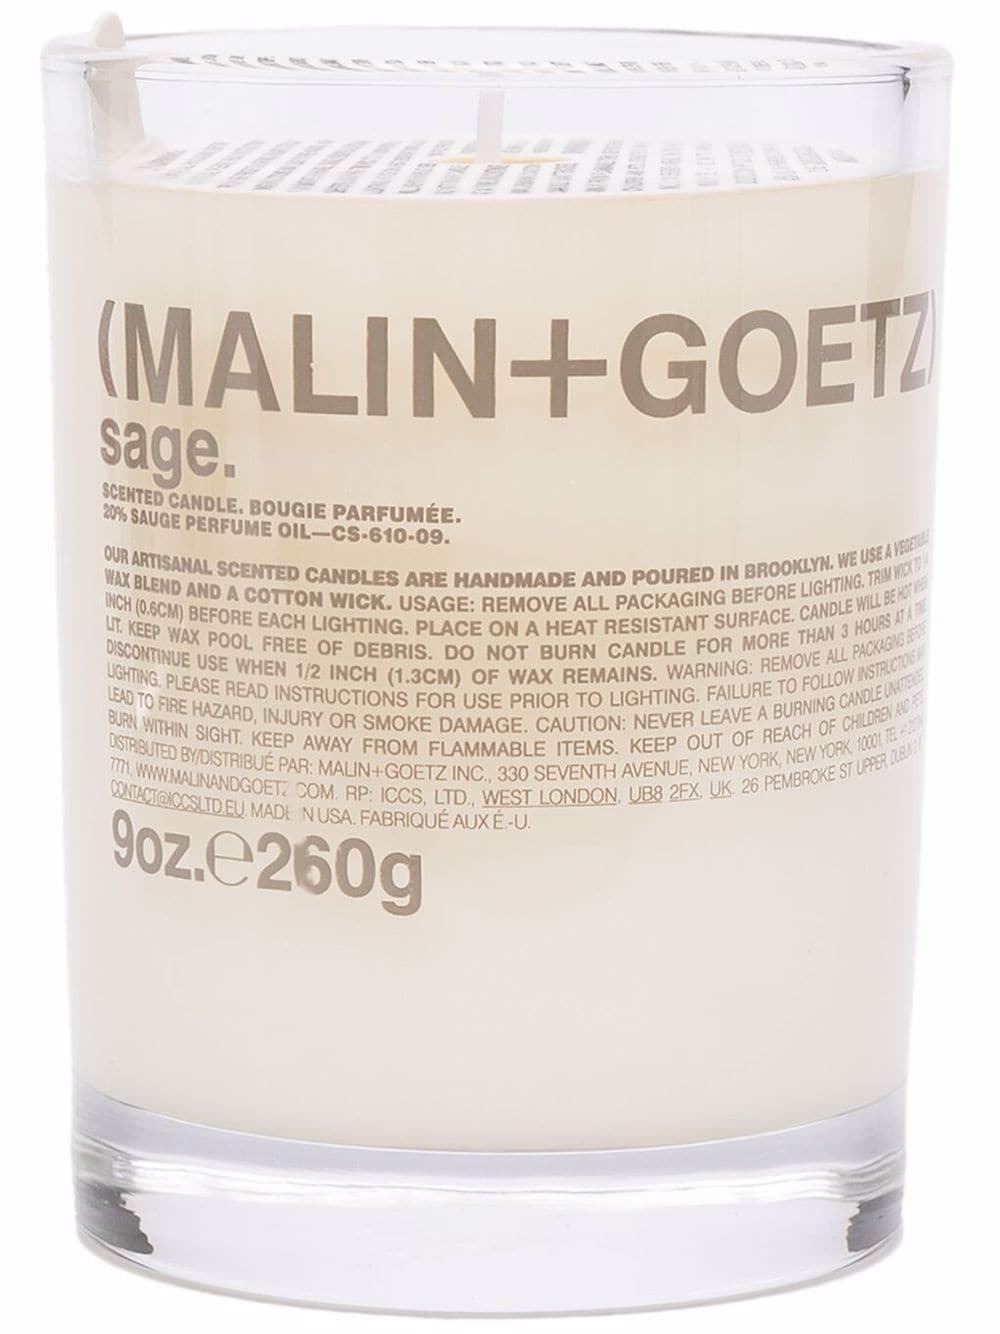 Malin + Goetz Sage Glass Candle In White